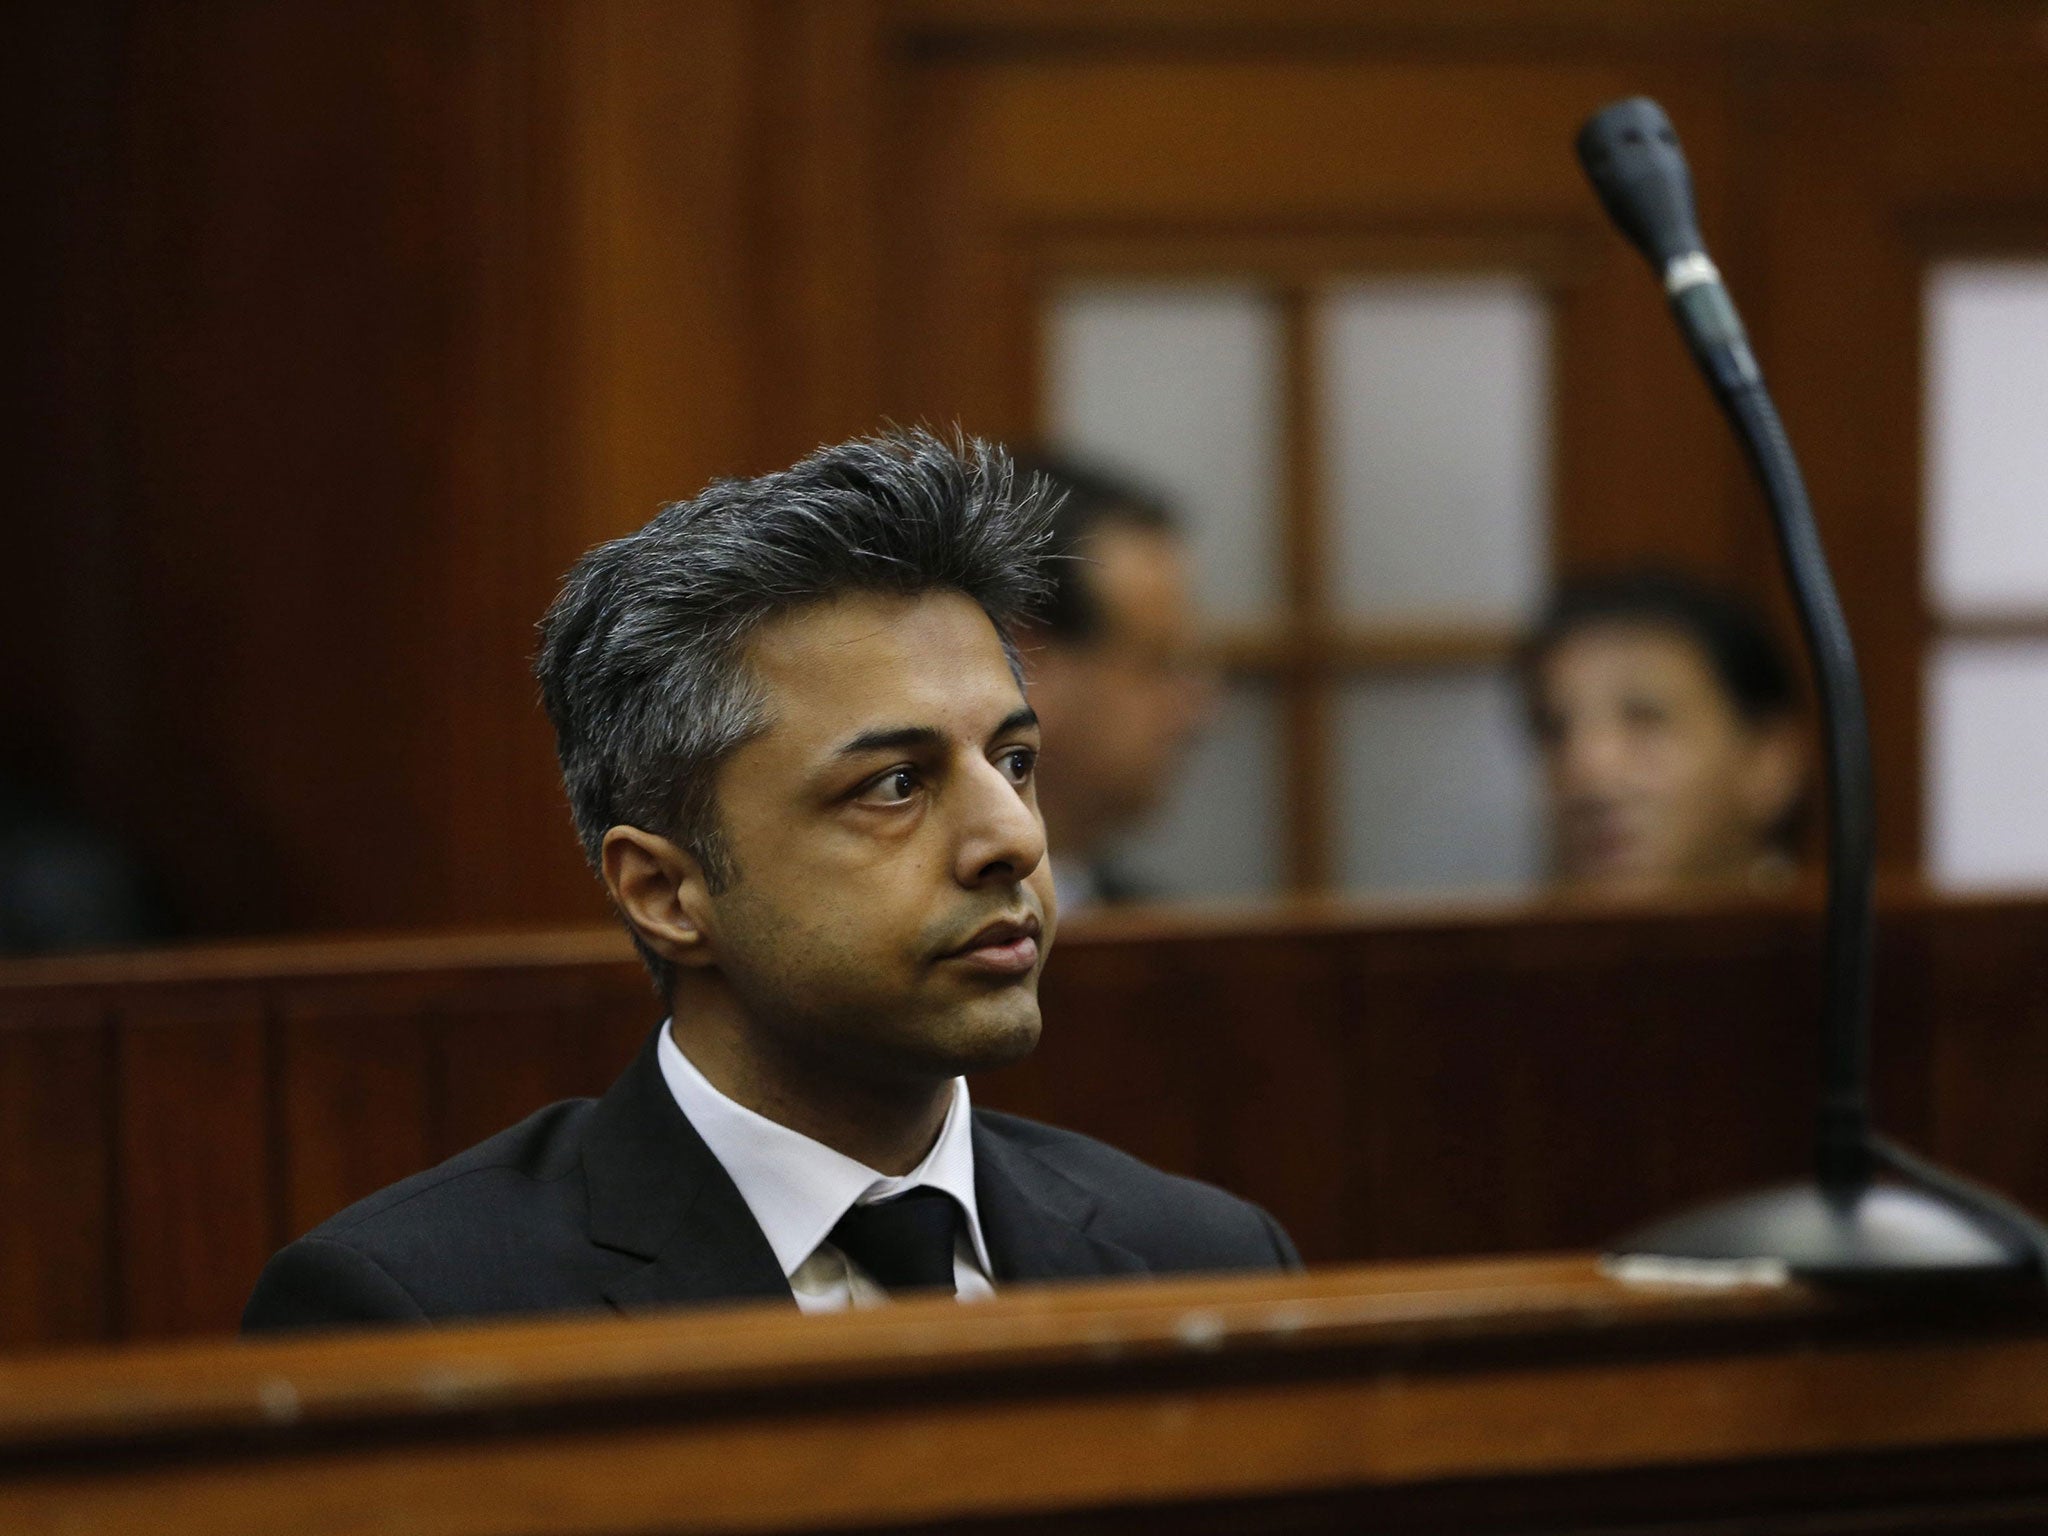 British businessman Shrien Dewani sits in the dock before the start of his trial at the Western Cape High Court, Cape Town,